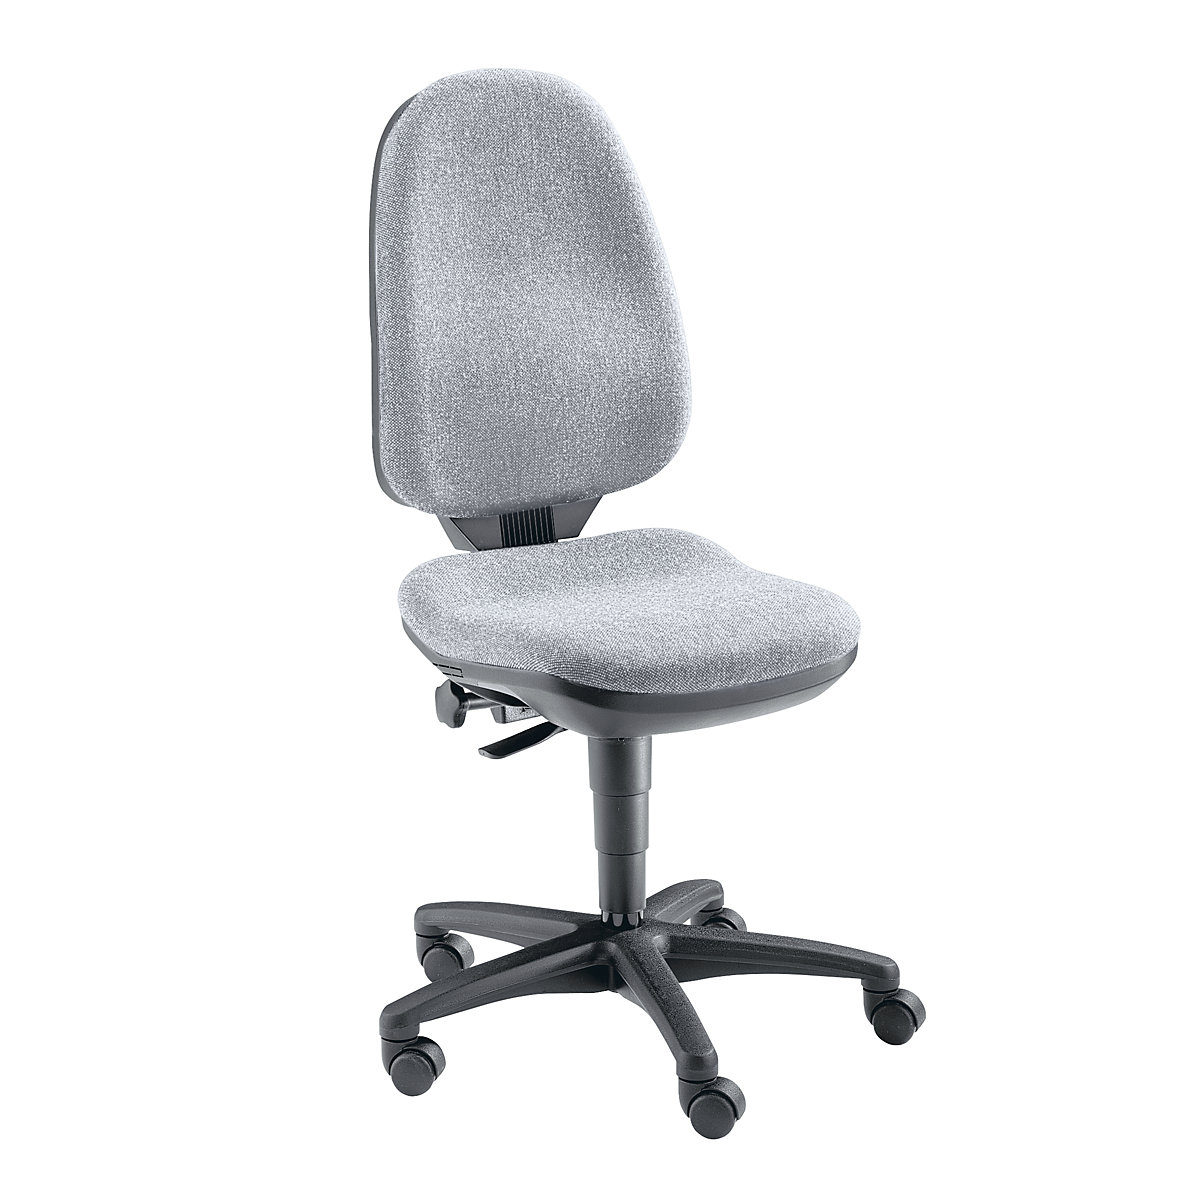 Ergonomic swivel chair – Topstar, without arm rests, grey fabric covering-4